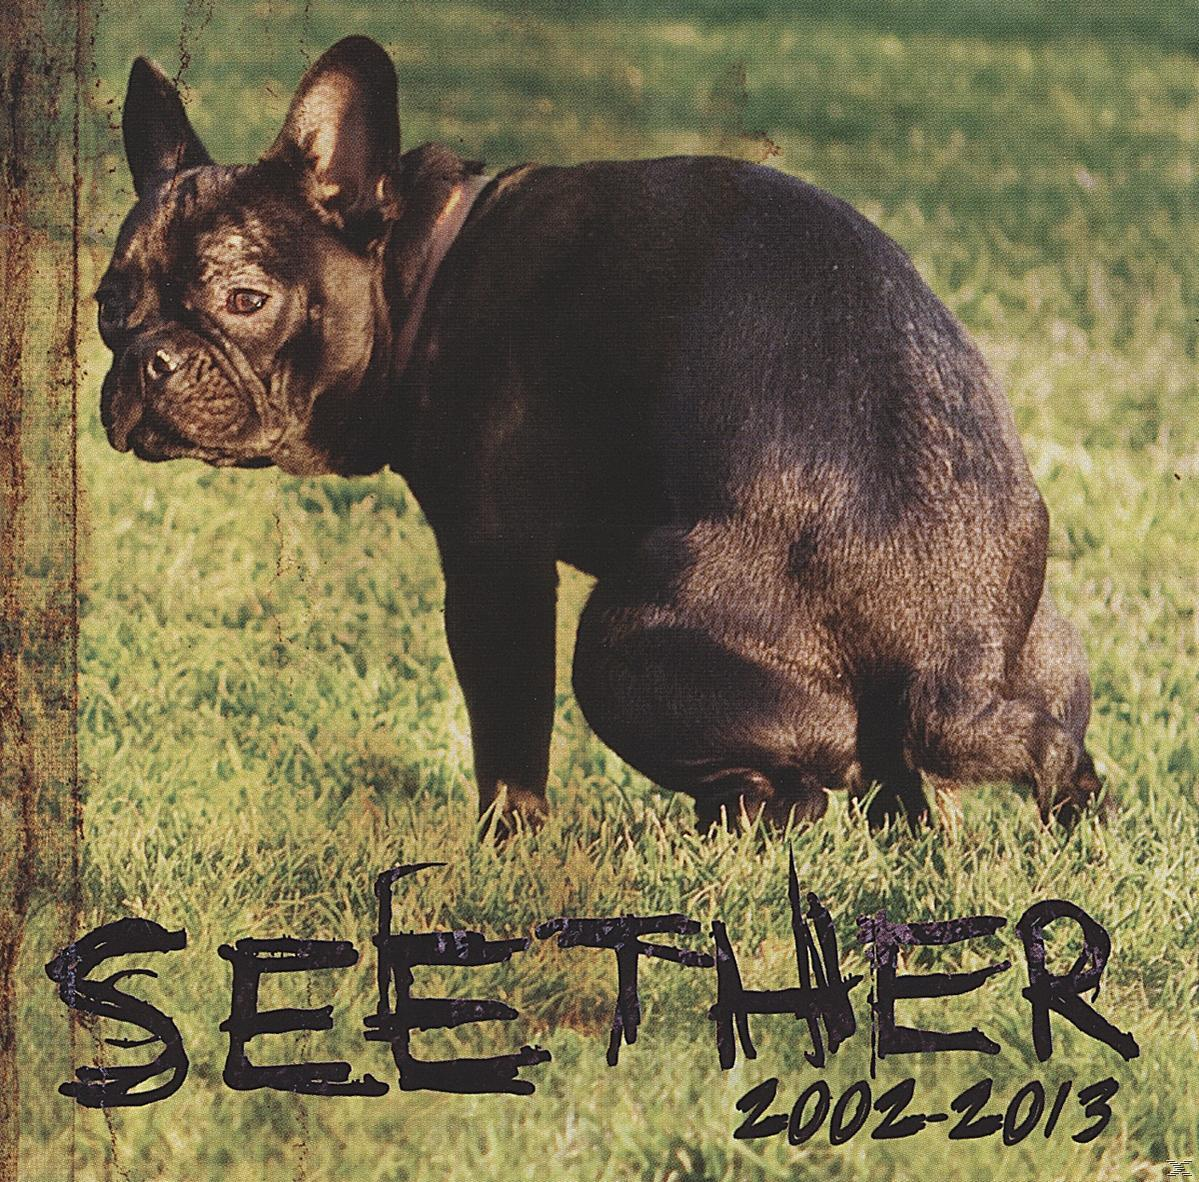 Seether - Seether 2002-2013 - (CD)